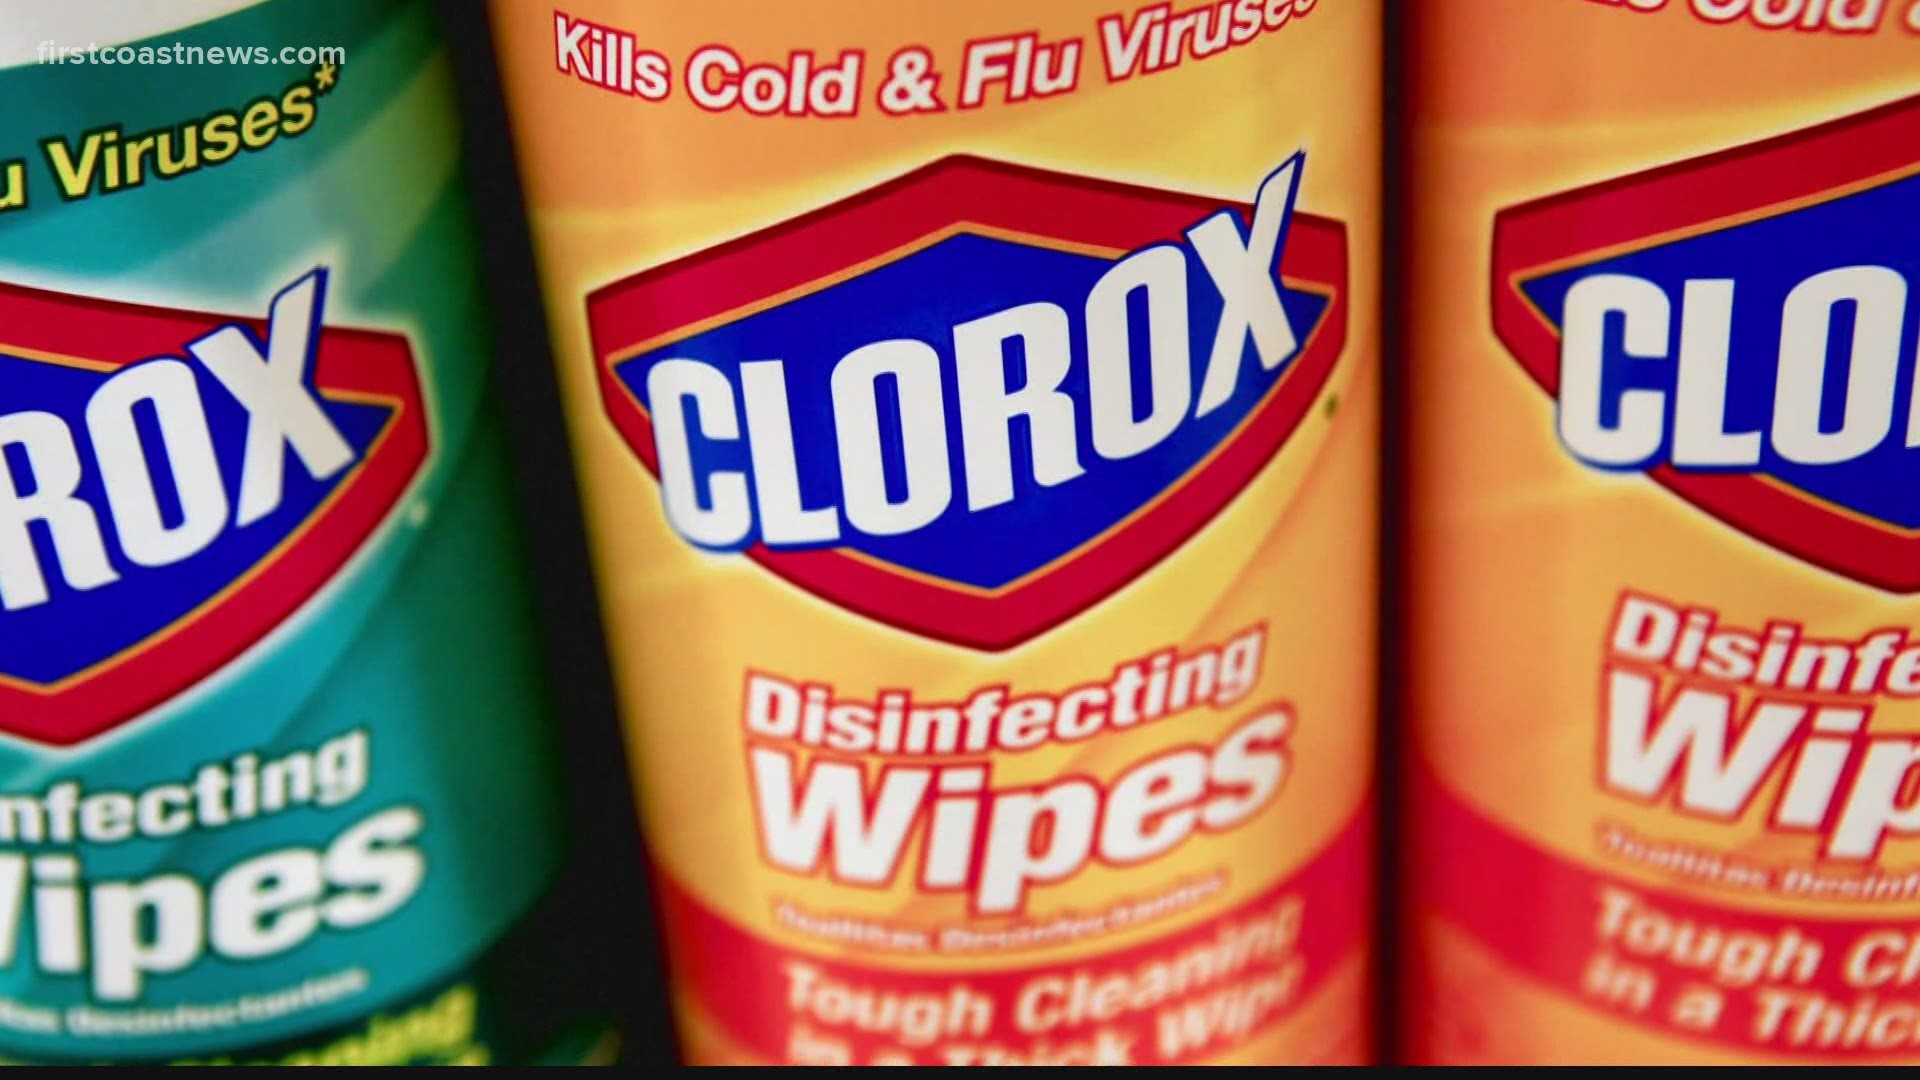 The same chemical used to make those wipes is also used to make Personal Protective Equipment.